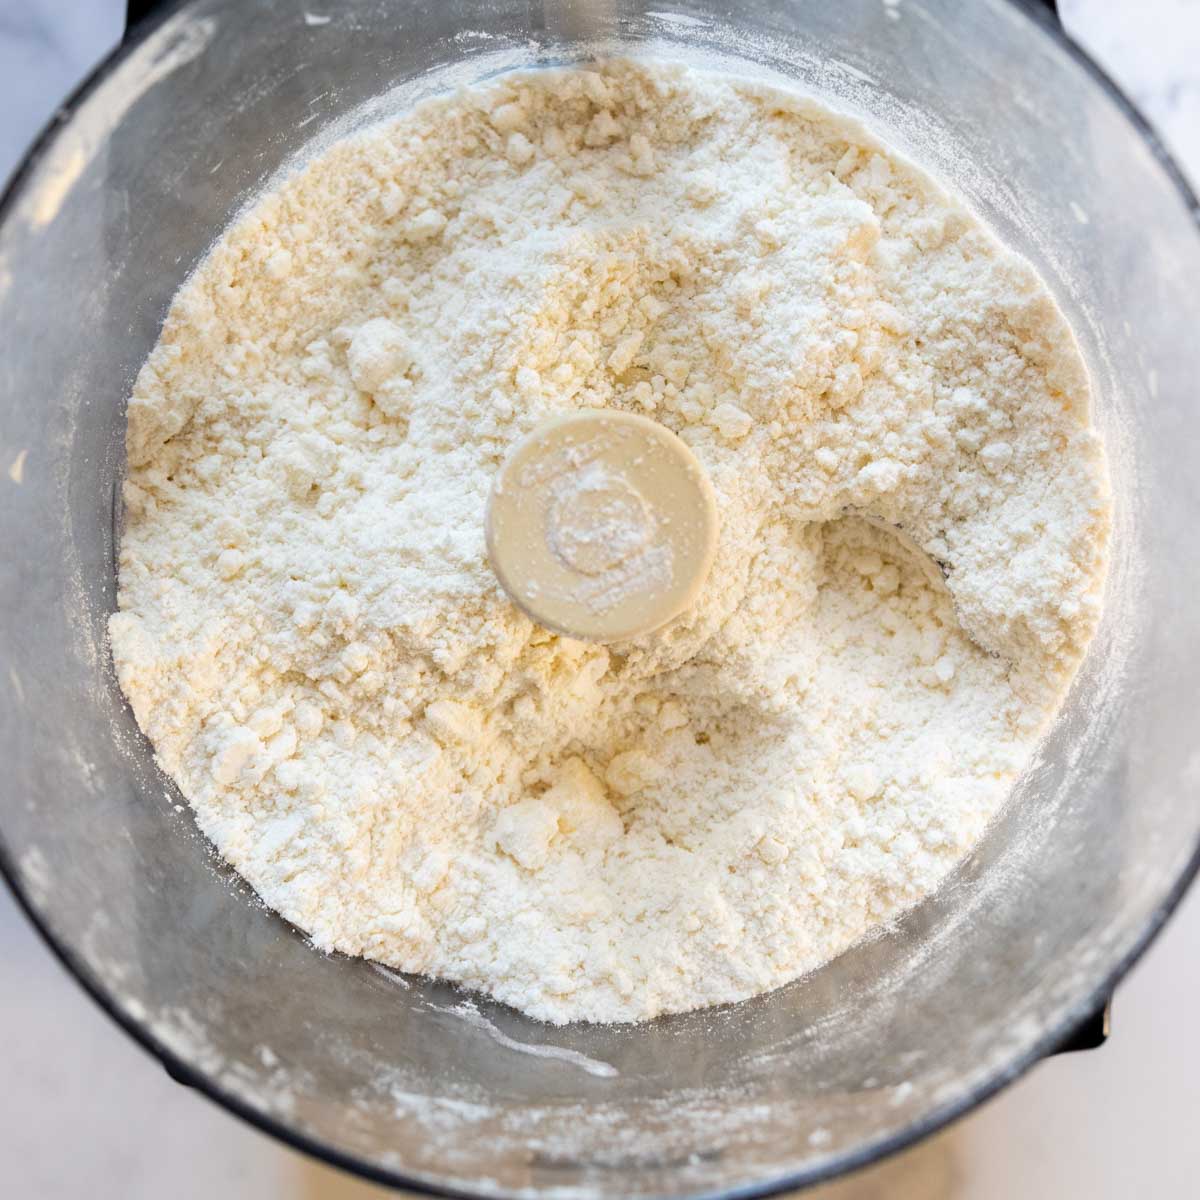 the gluten-free flour mixed with butter.